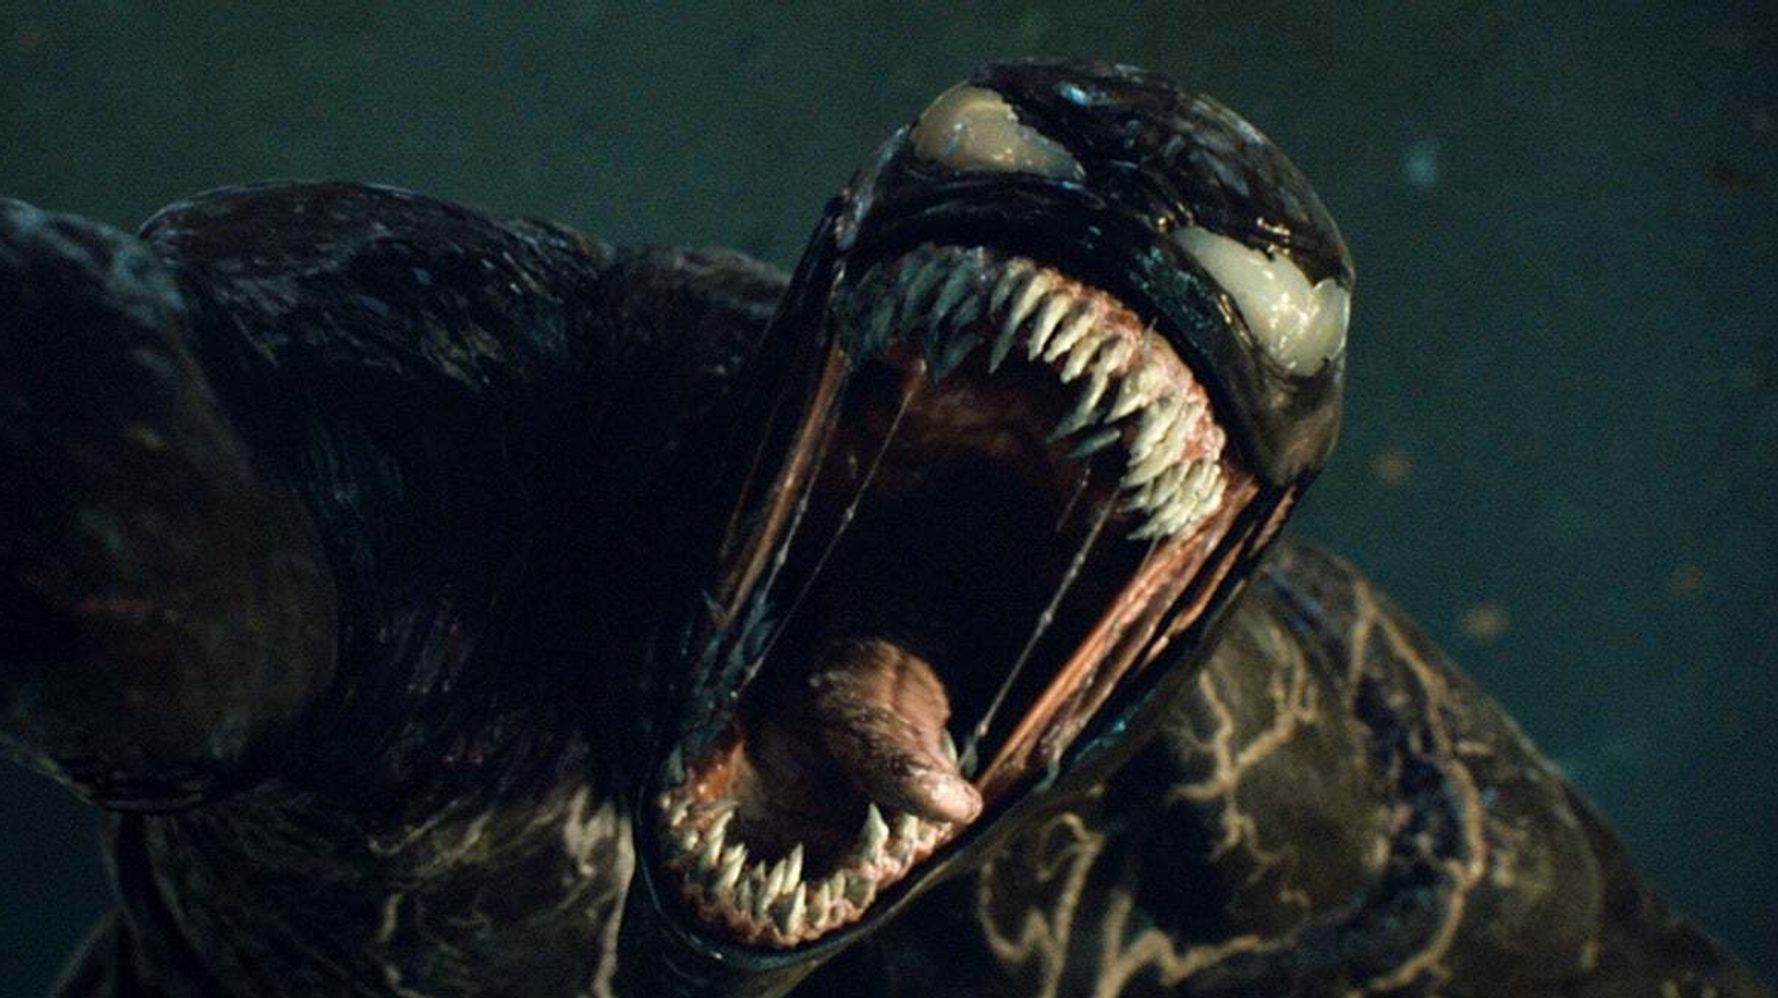 Venom Chews The Scenery, Everything Else In Absolutely Bonkers Sequel Trailer